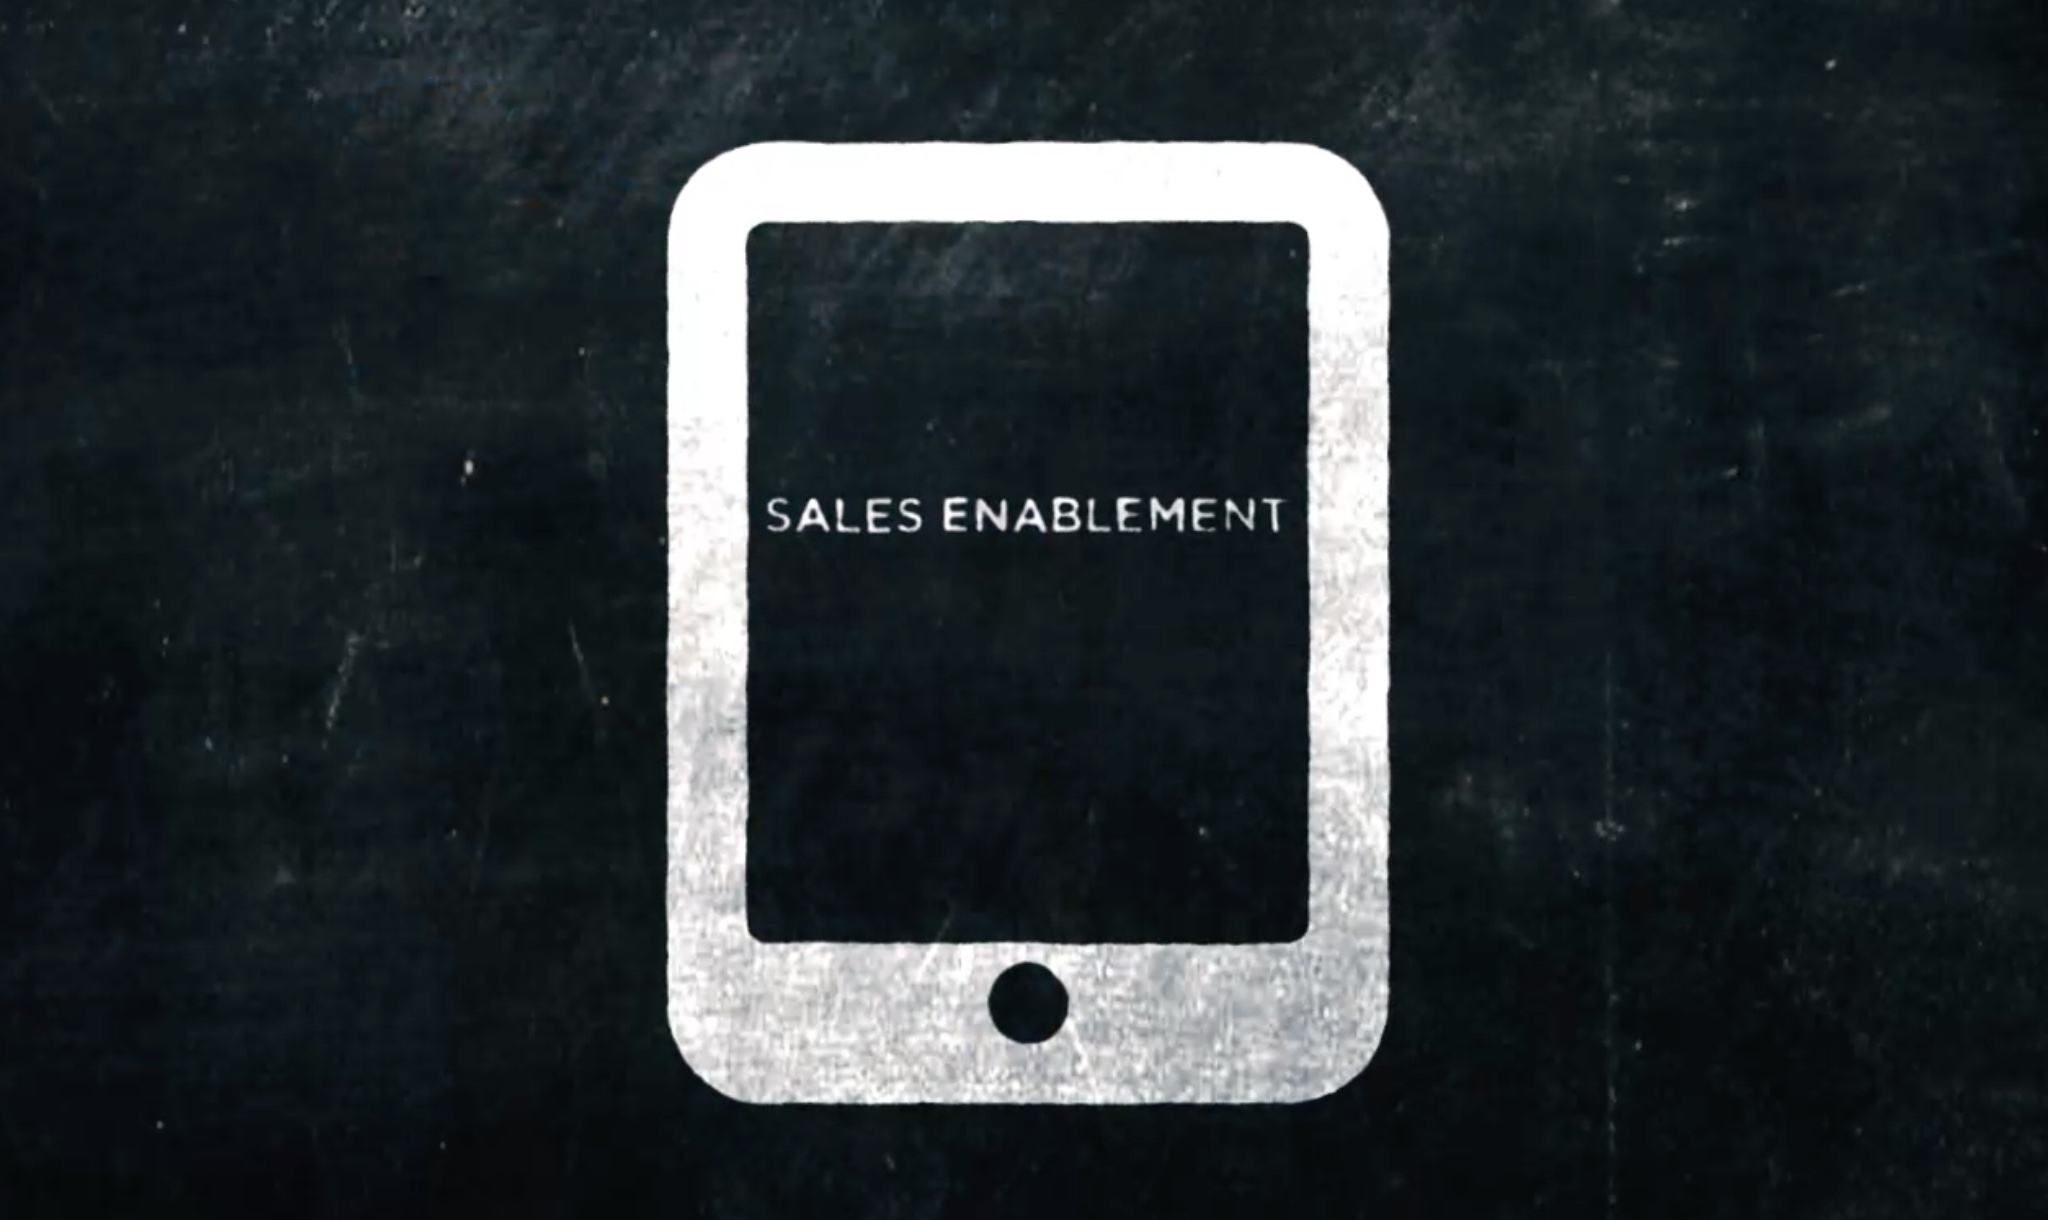 Part 1: What is Sales Enablement?